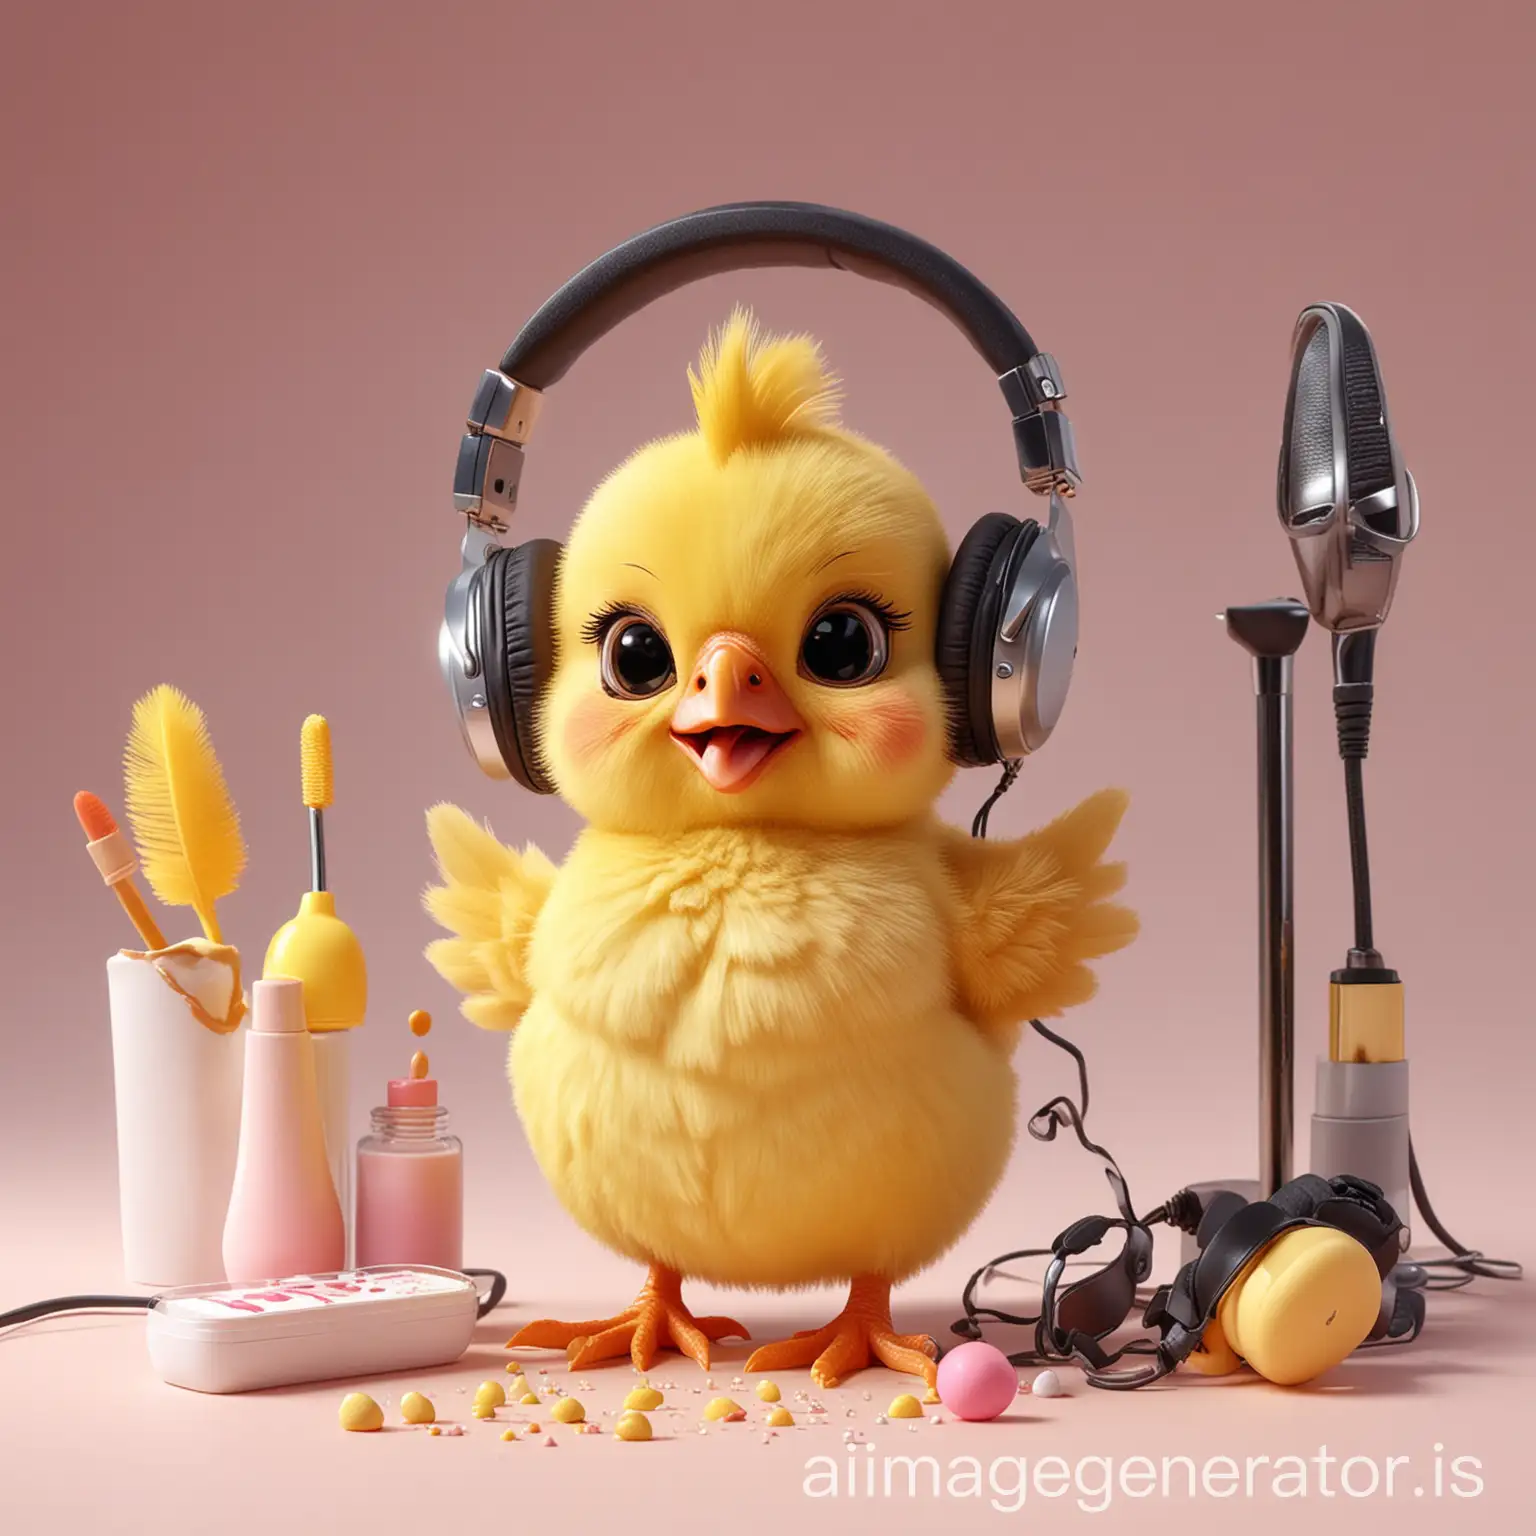 A cute yellow baby chicken cartoon with makeup accessories, shower cream, and headphones.